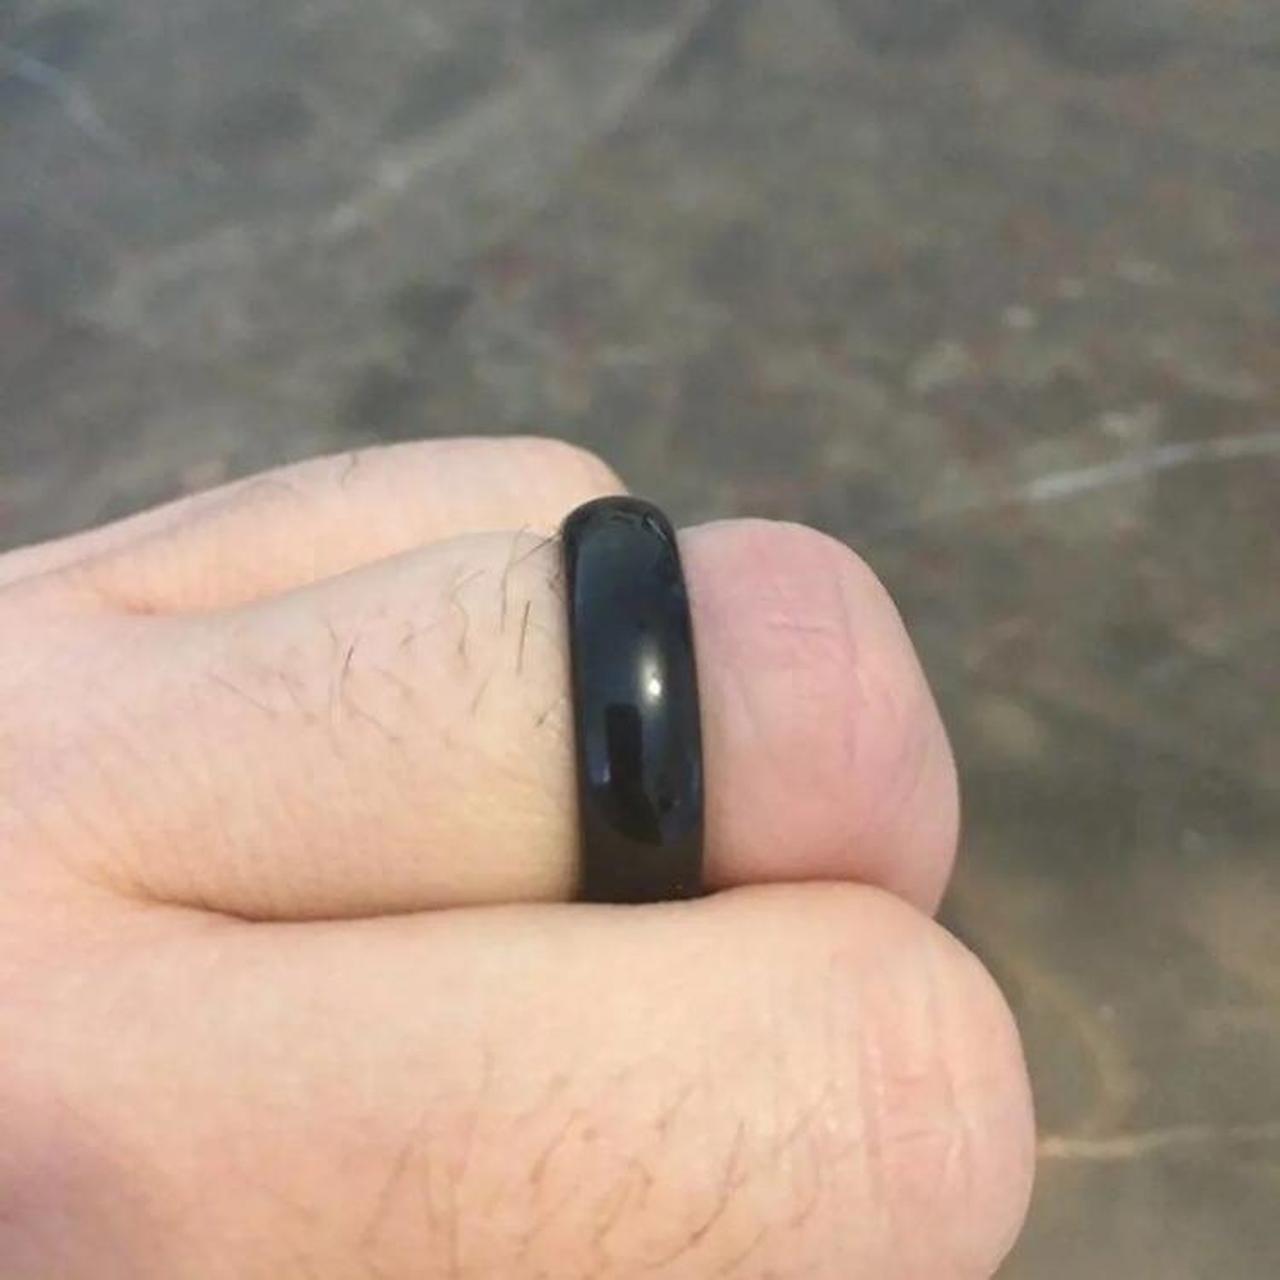 Product Image 2 - Black obsidian ring size 6
condition: